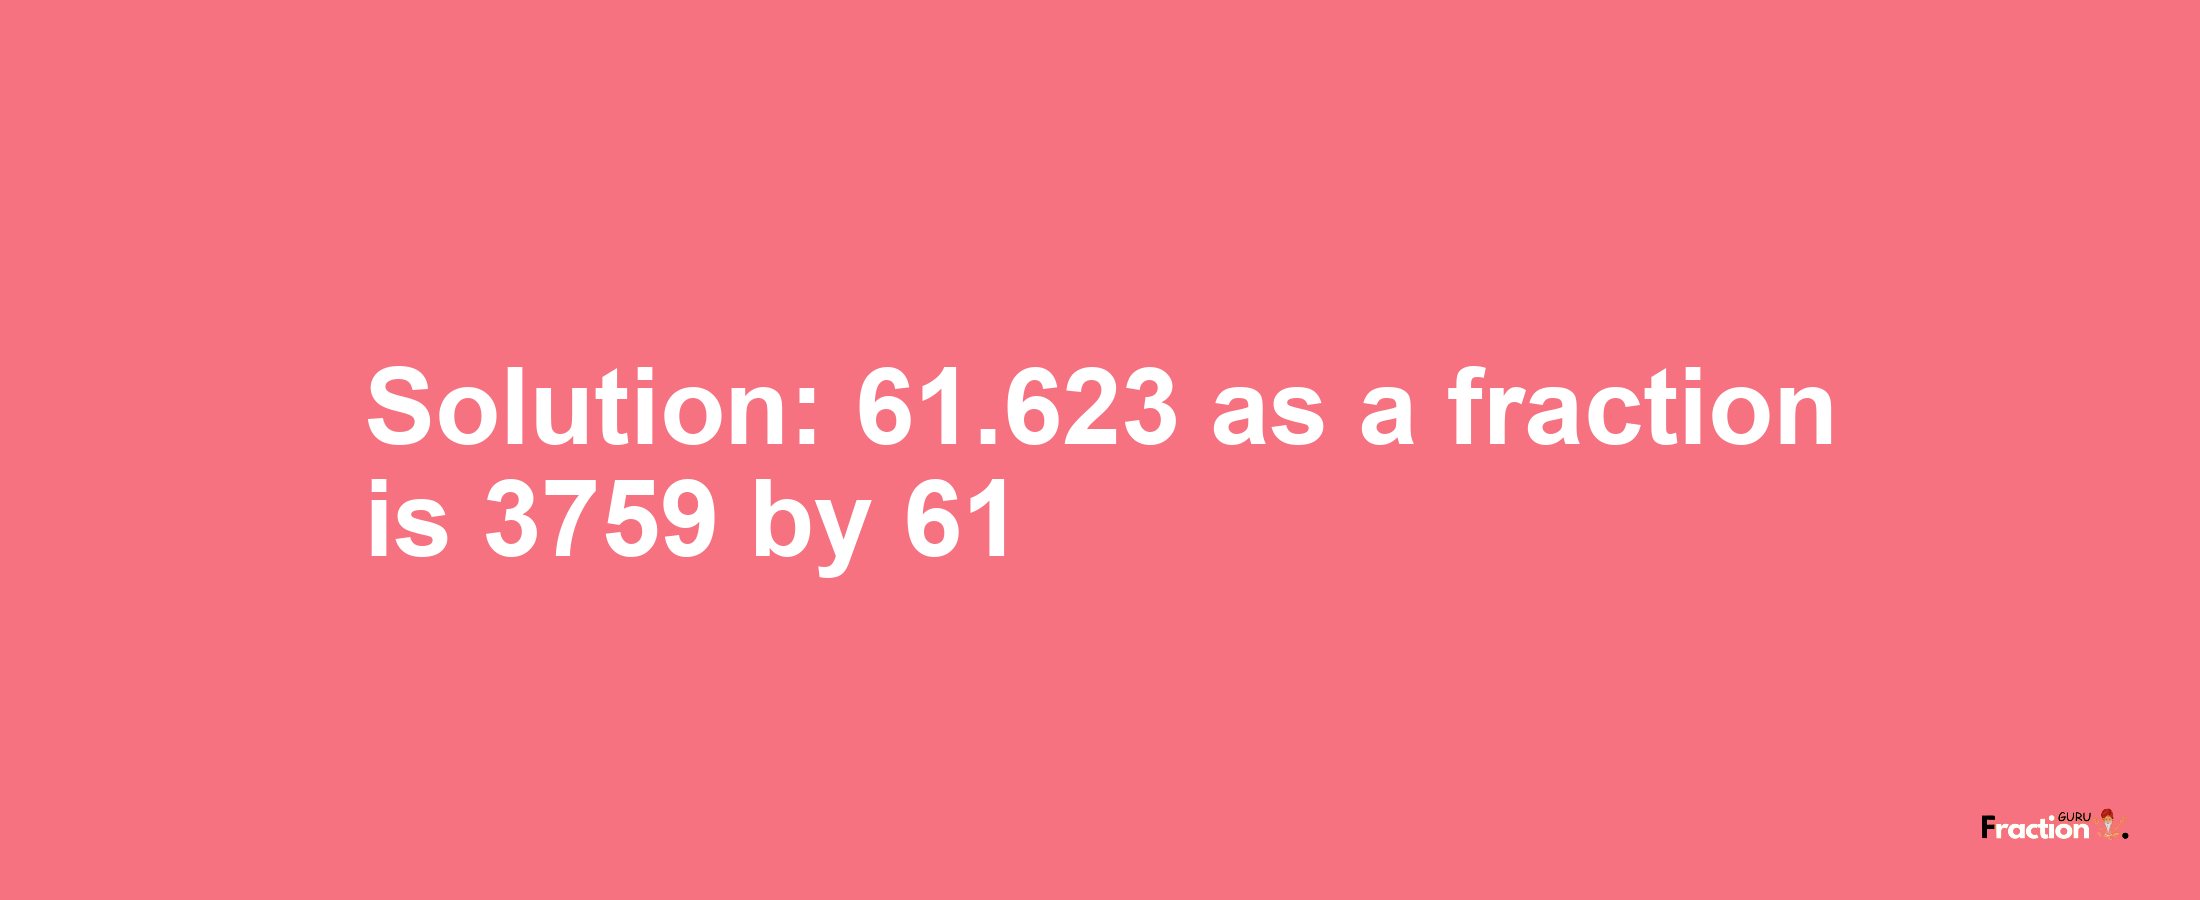 Solution:61.623 as a fraction is 3759/61